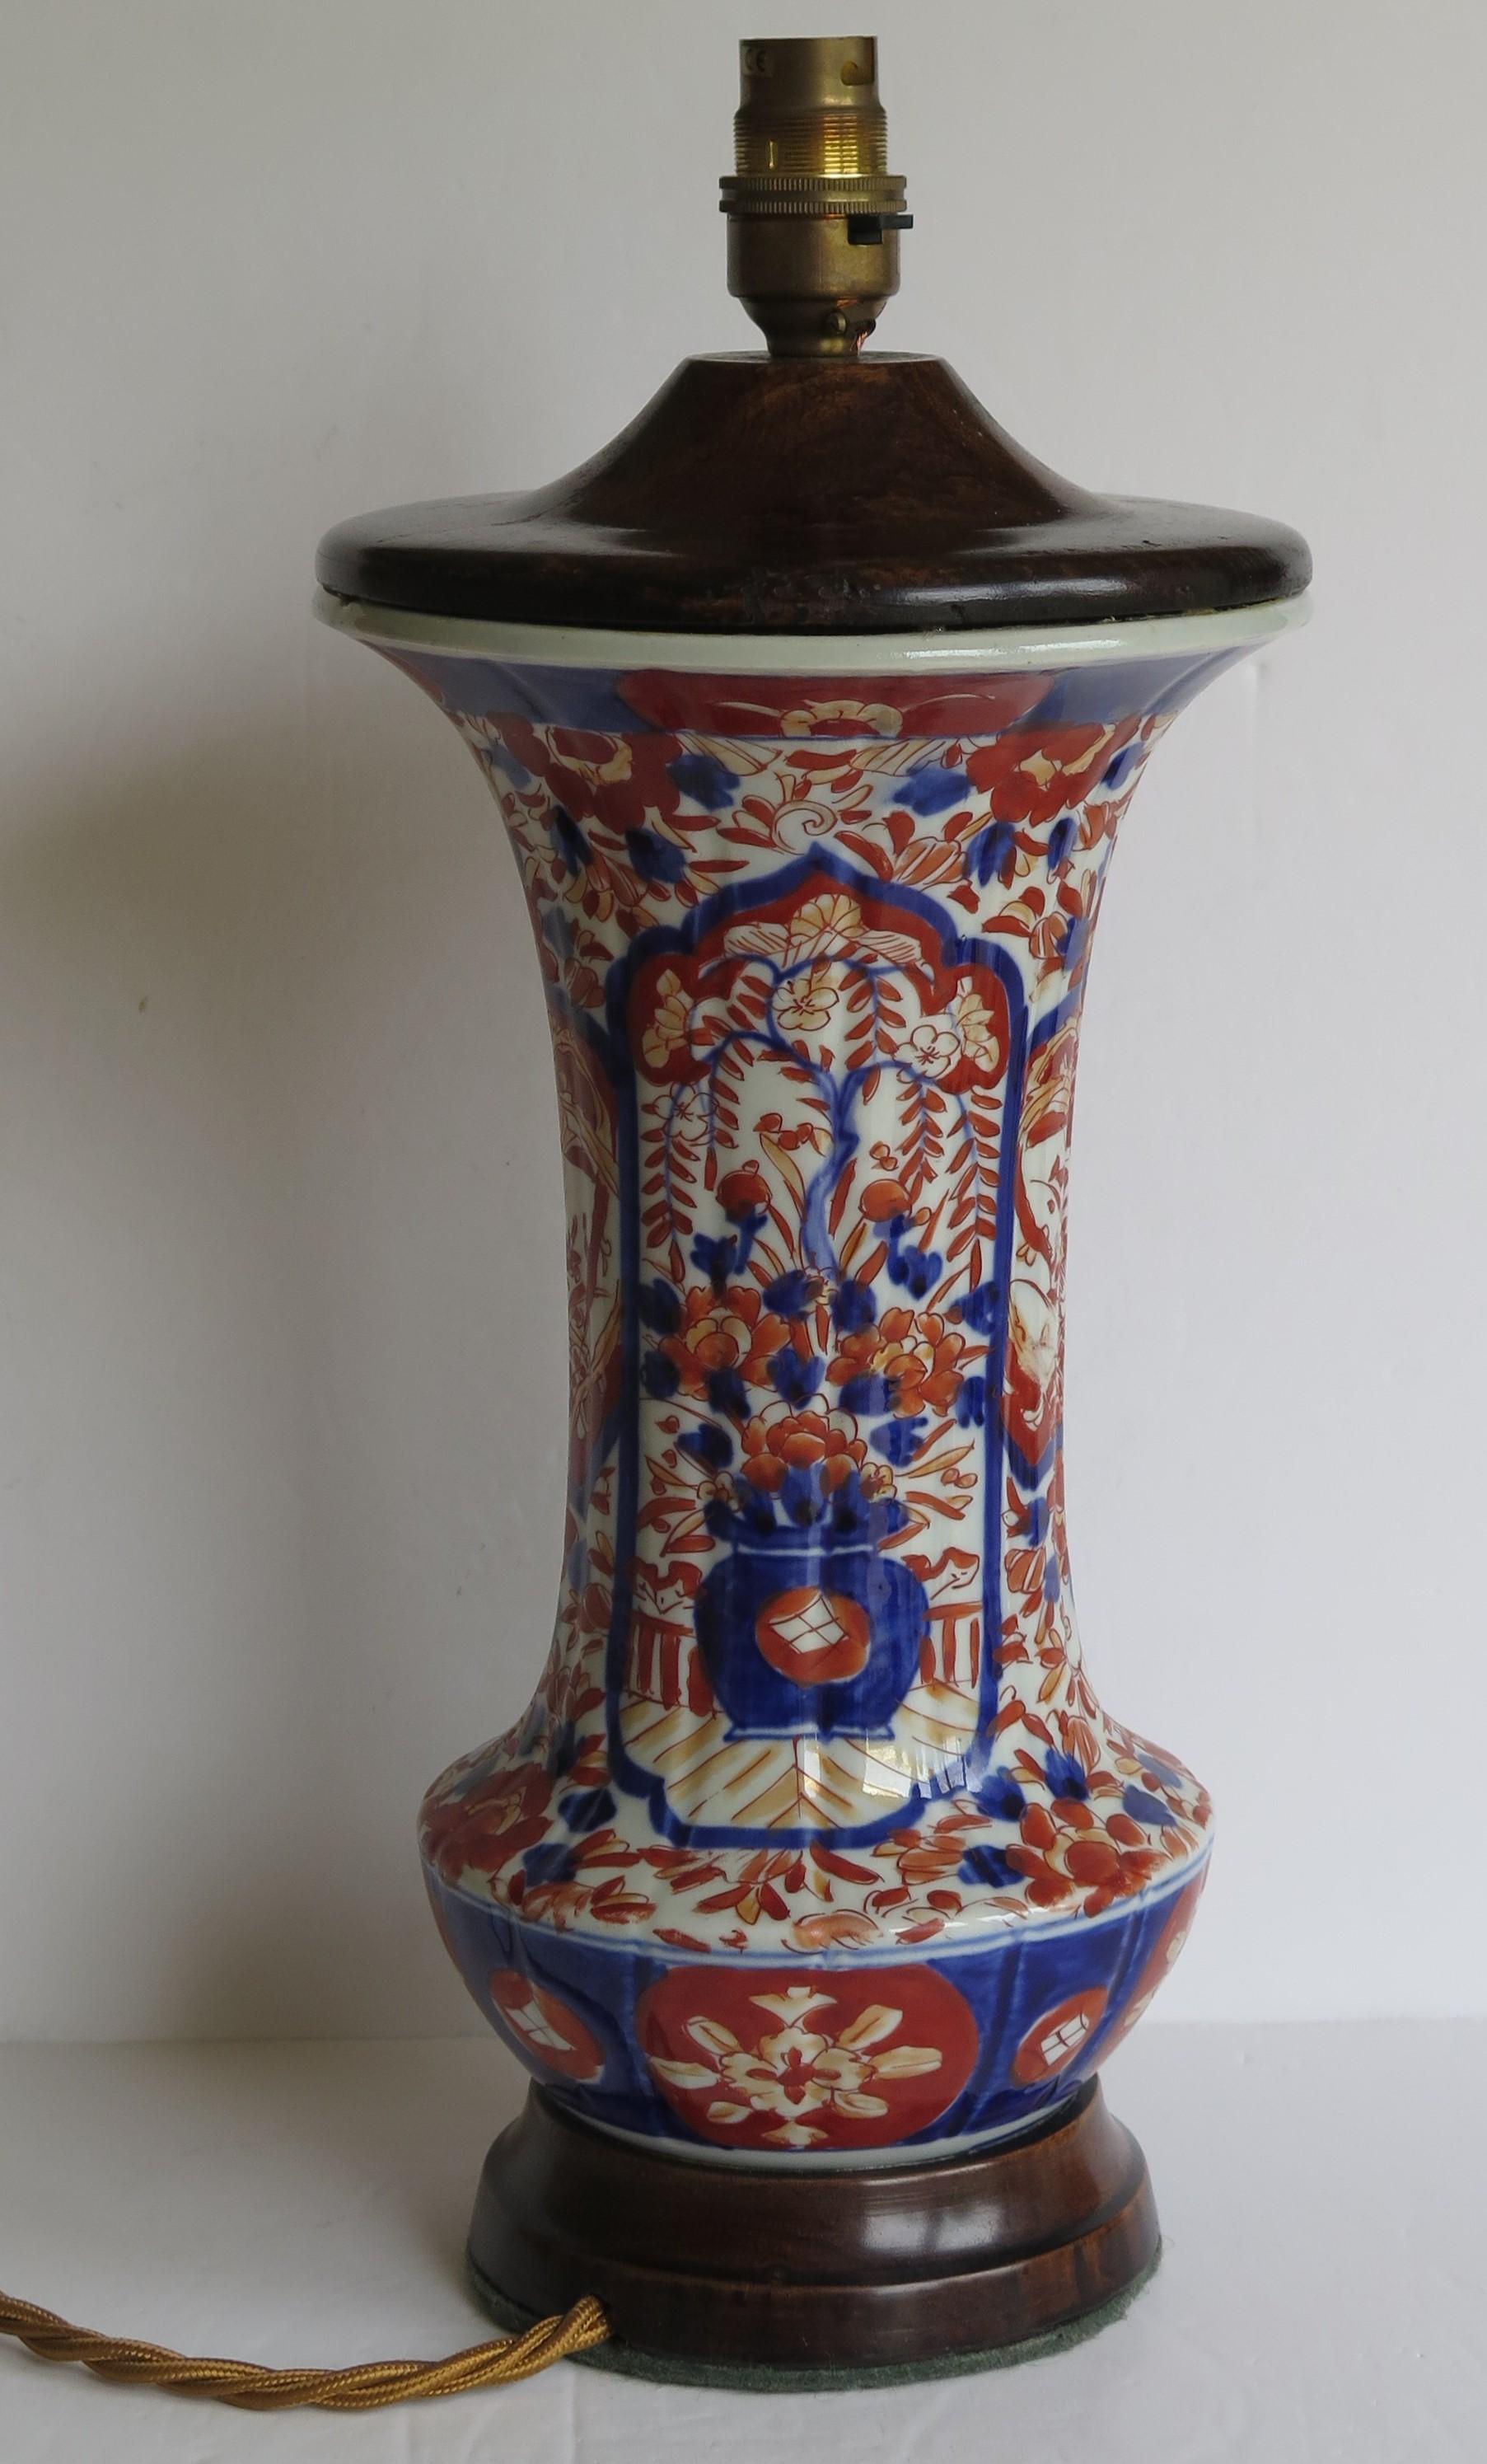 This is a good quality and very decorative, hand painted Imari Japanese Porcelain vase, converted to a table lamp which we date to the Meiji period of the 19th century, circa 1875.

This vase is tall and has been well hand-painted in varying